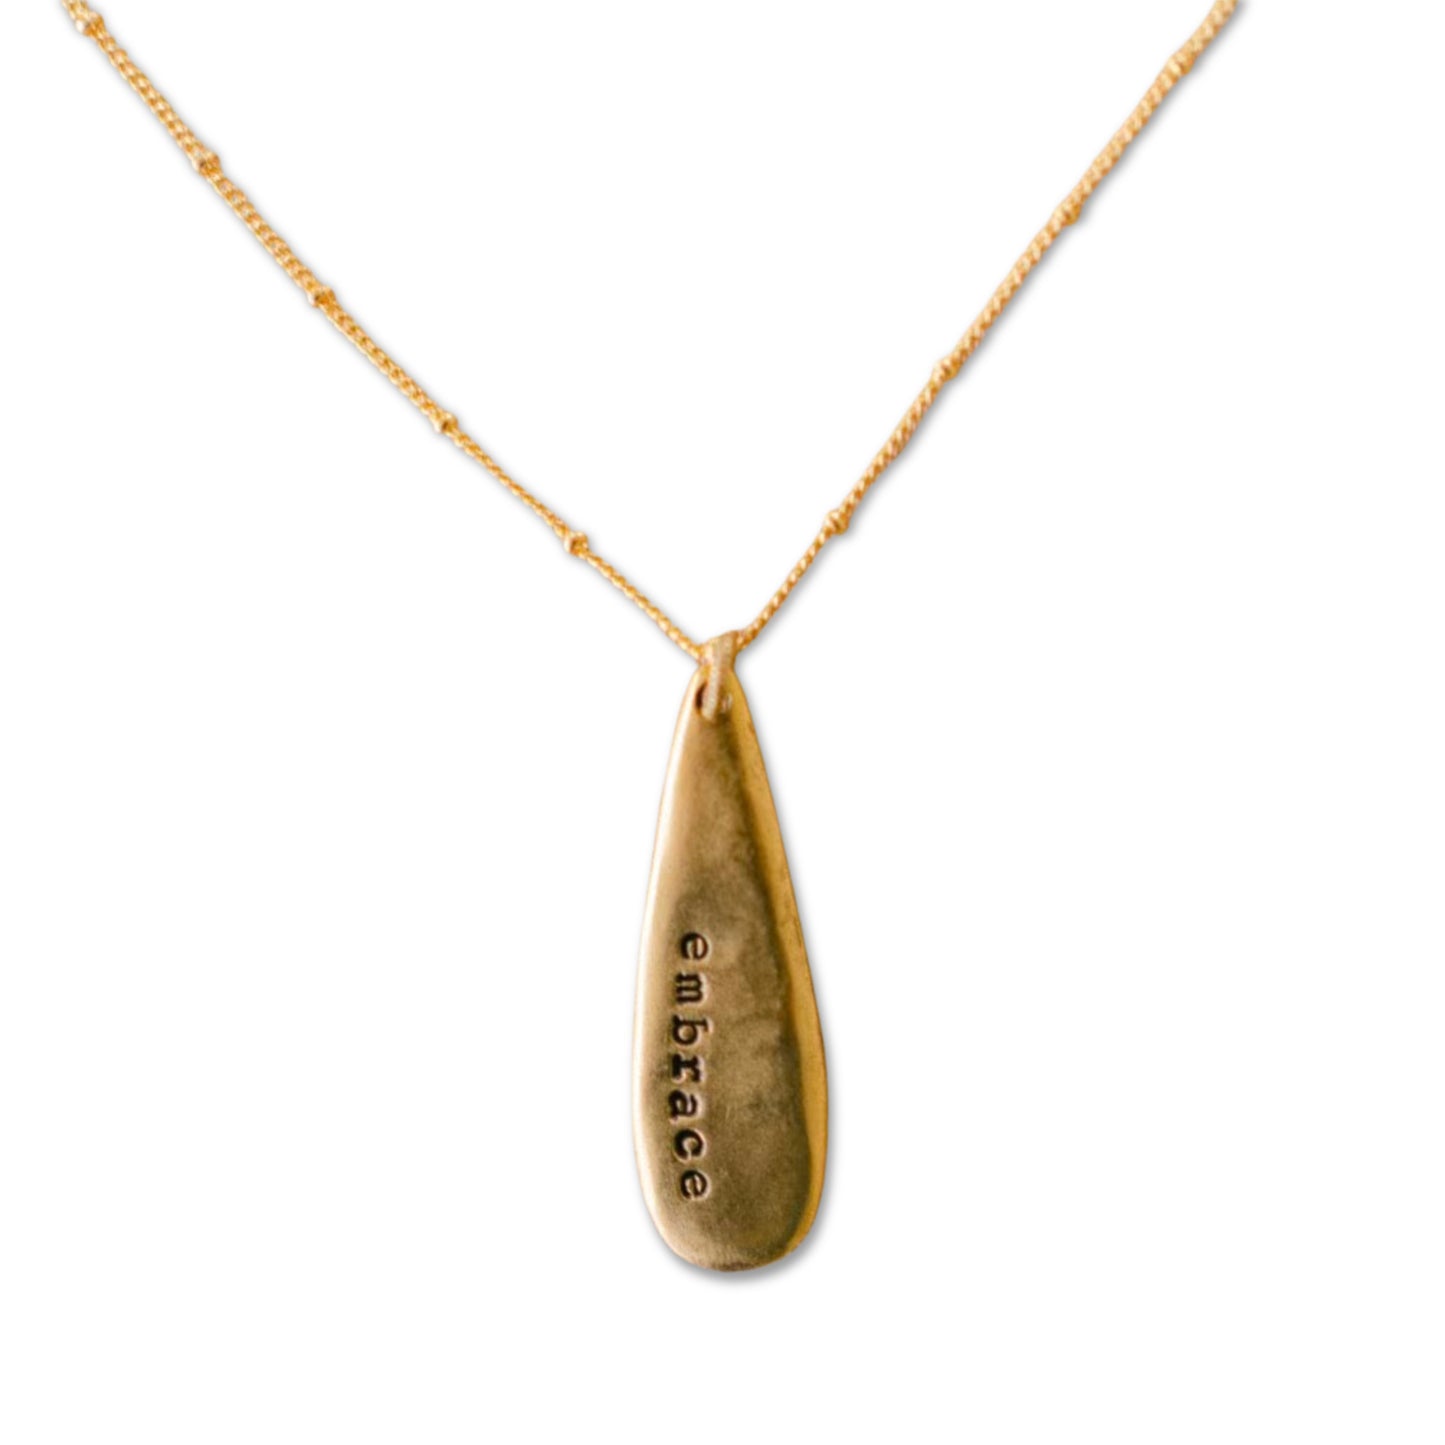 Heaven Inspired Eleasa Necklace - Gold